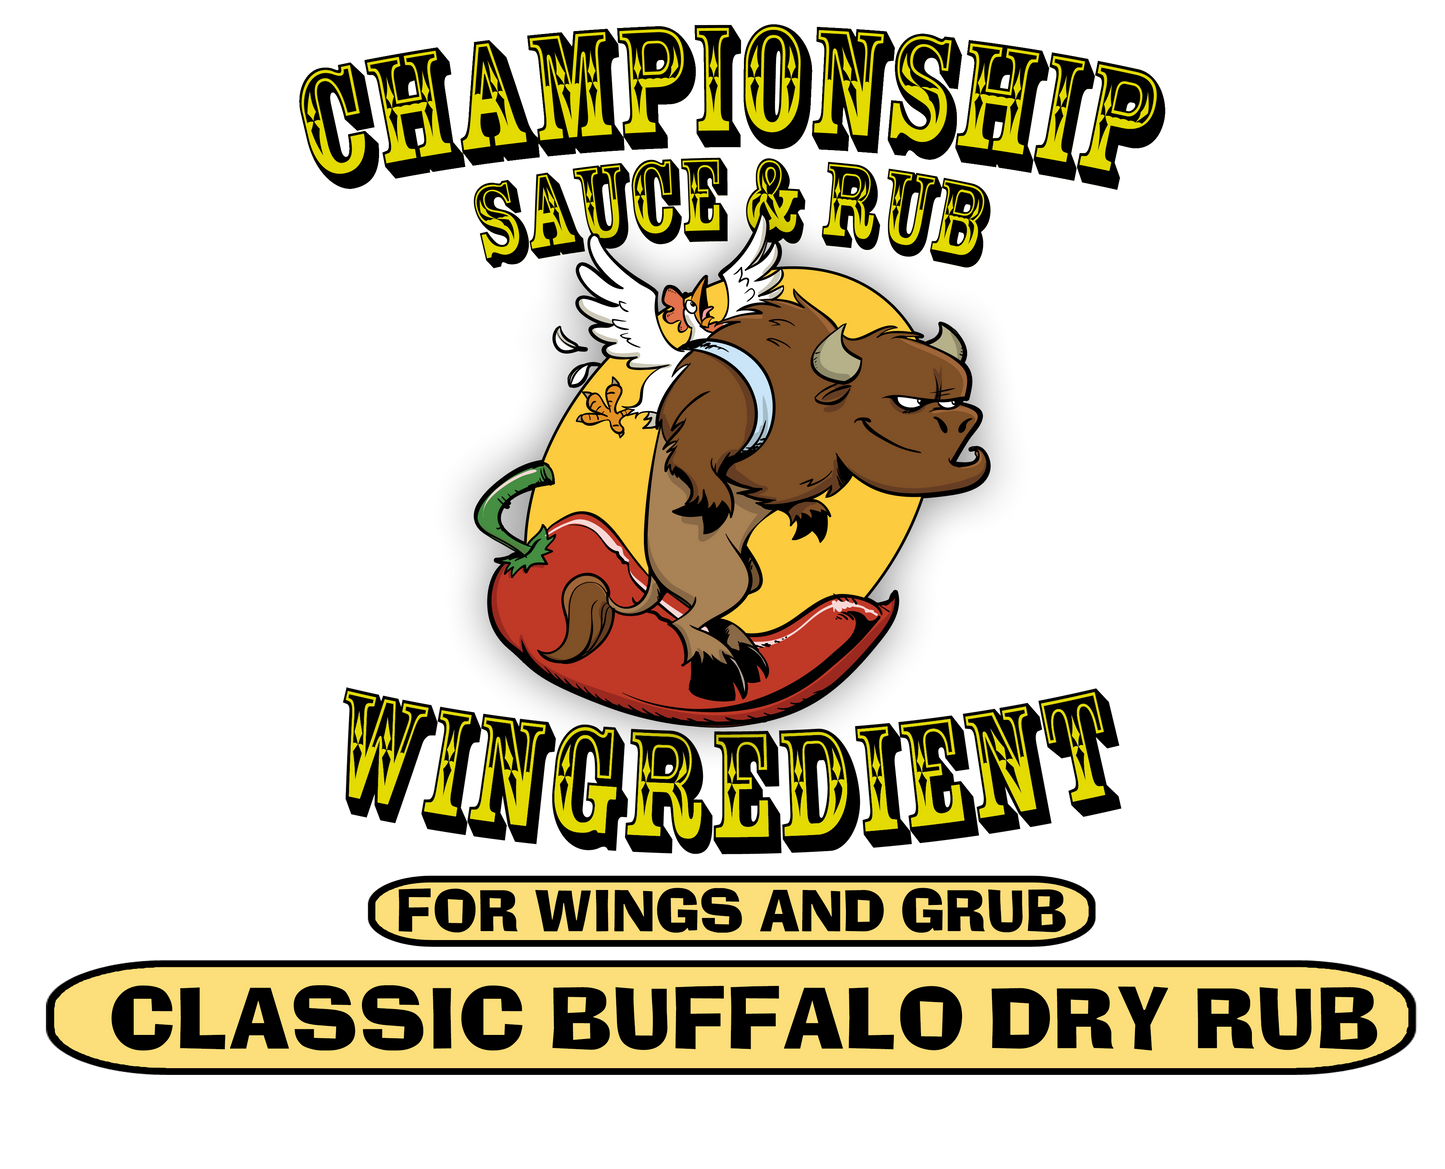 Classic Dry Rub - Commercial Case of 5 - Wing Sauce Mix